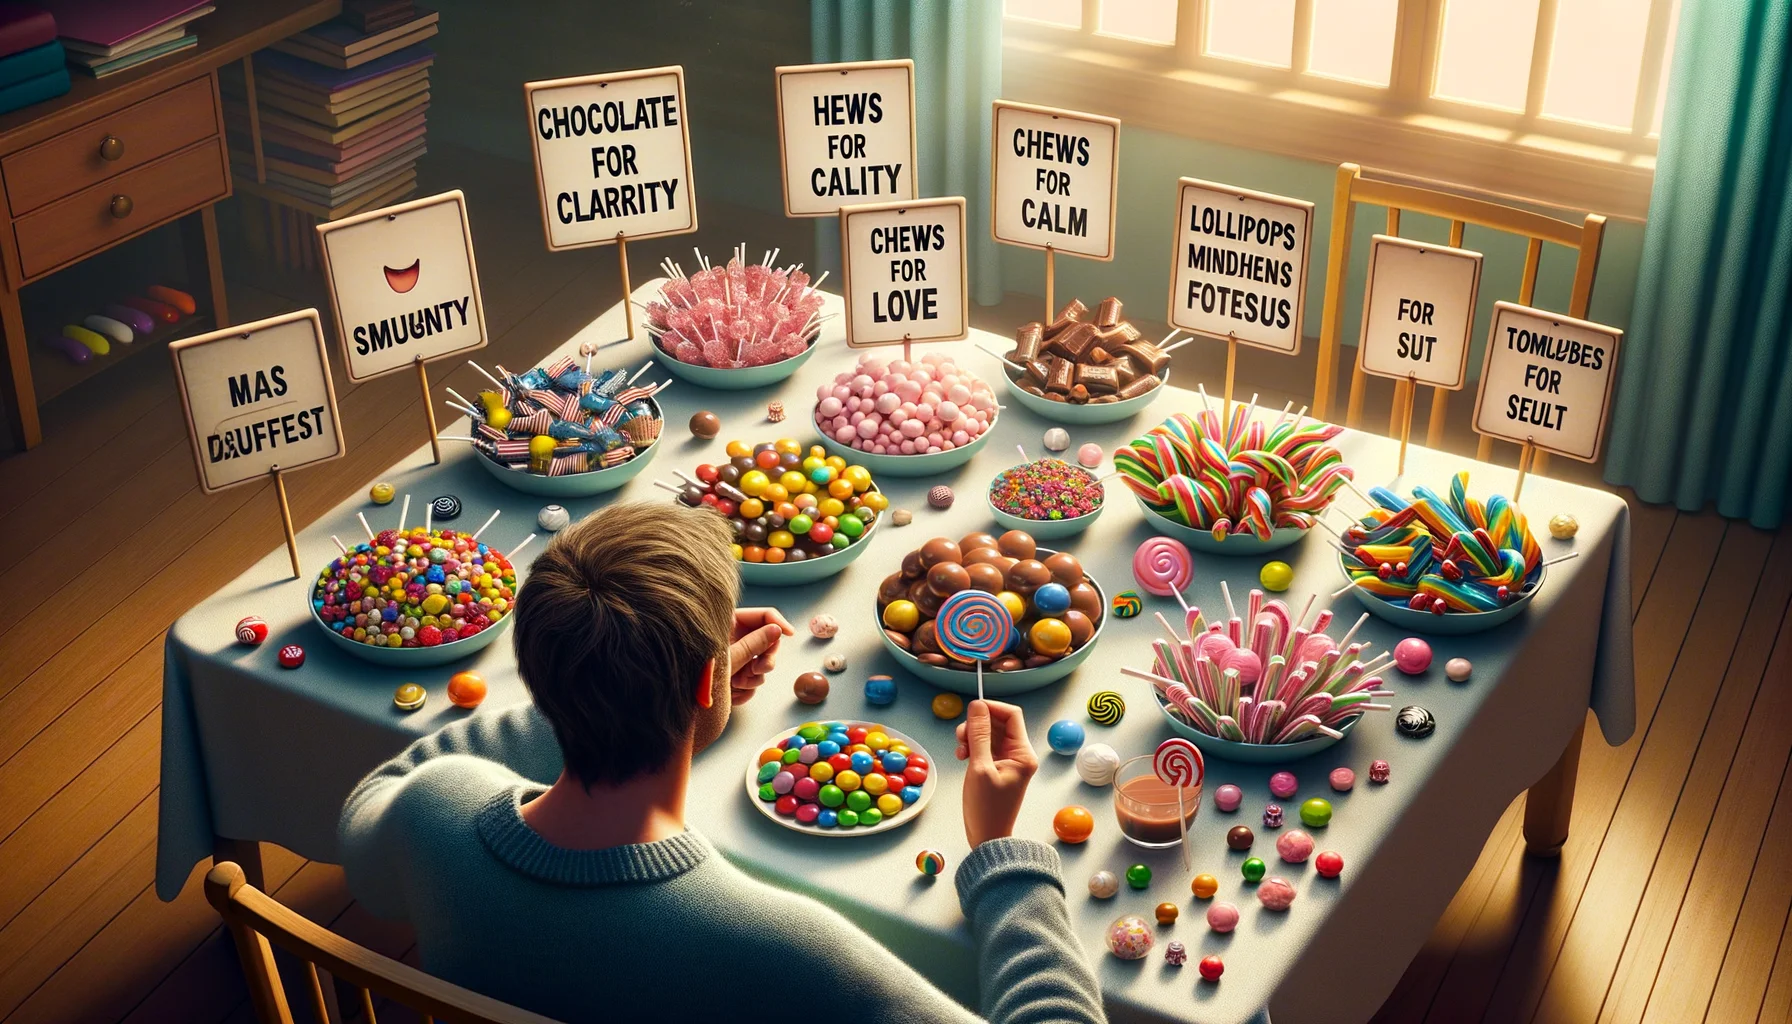 Imagine a humorous and realistic scenario. A wide variety of colorful candy options are strewn across a breakfast table. The scene includes a series of quirky placards describing each candy's source of mindfulness - 'Chocolate for Clarity', 'Chews for Calm', 'Lollipops for Love' etc. There's a pair of hands each one with a different candy and seems indecisive showing the internal struggle of choosing which candy to eat first. The overall lighting is soft, creating an inviting, perfect atmosphere for mindful eating.